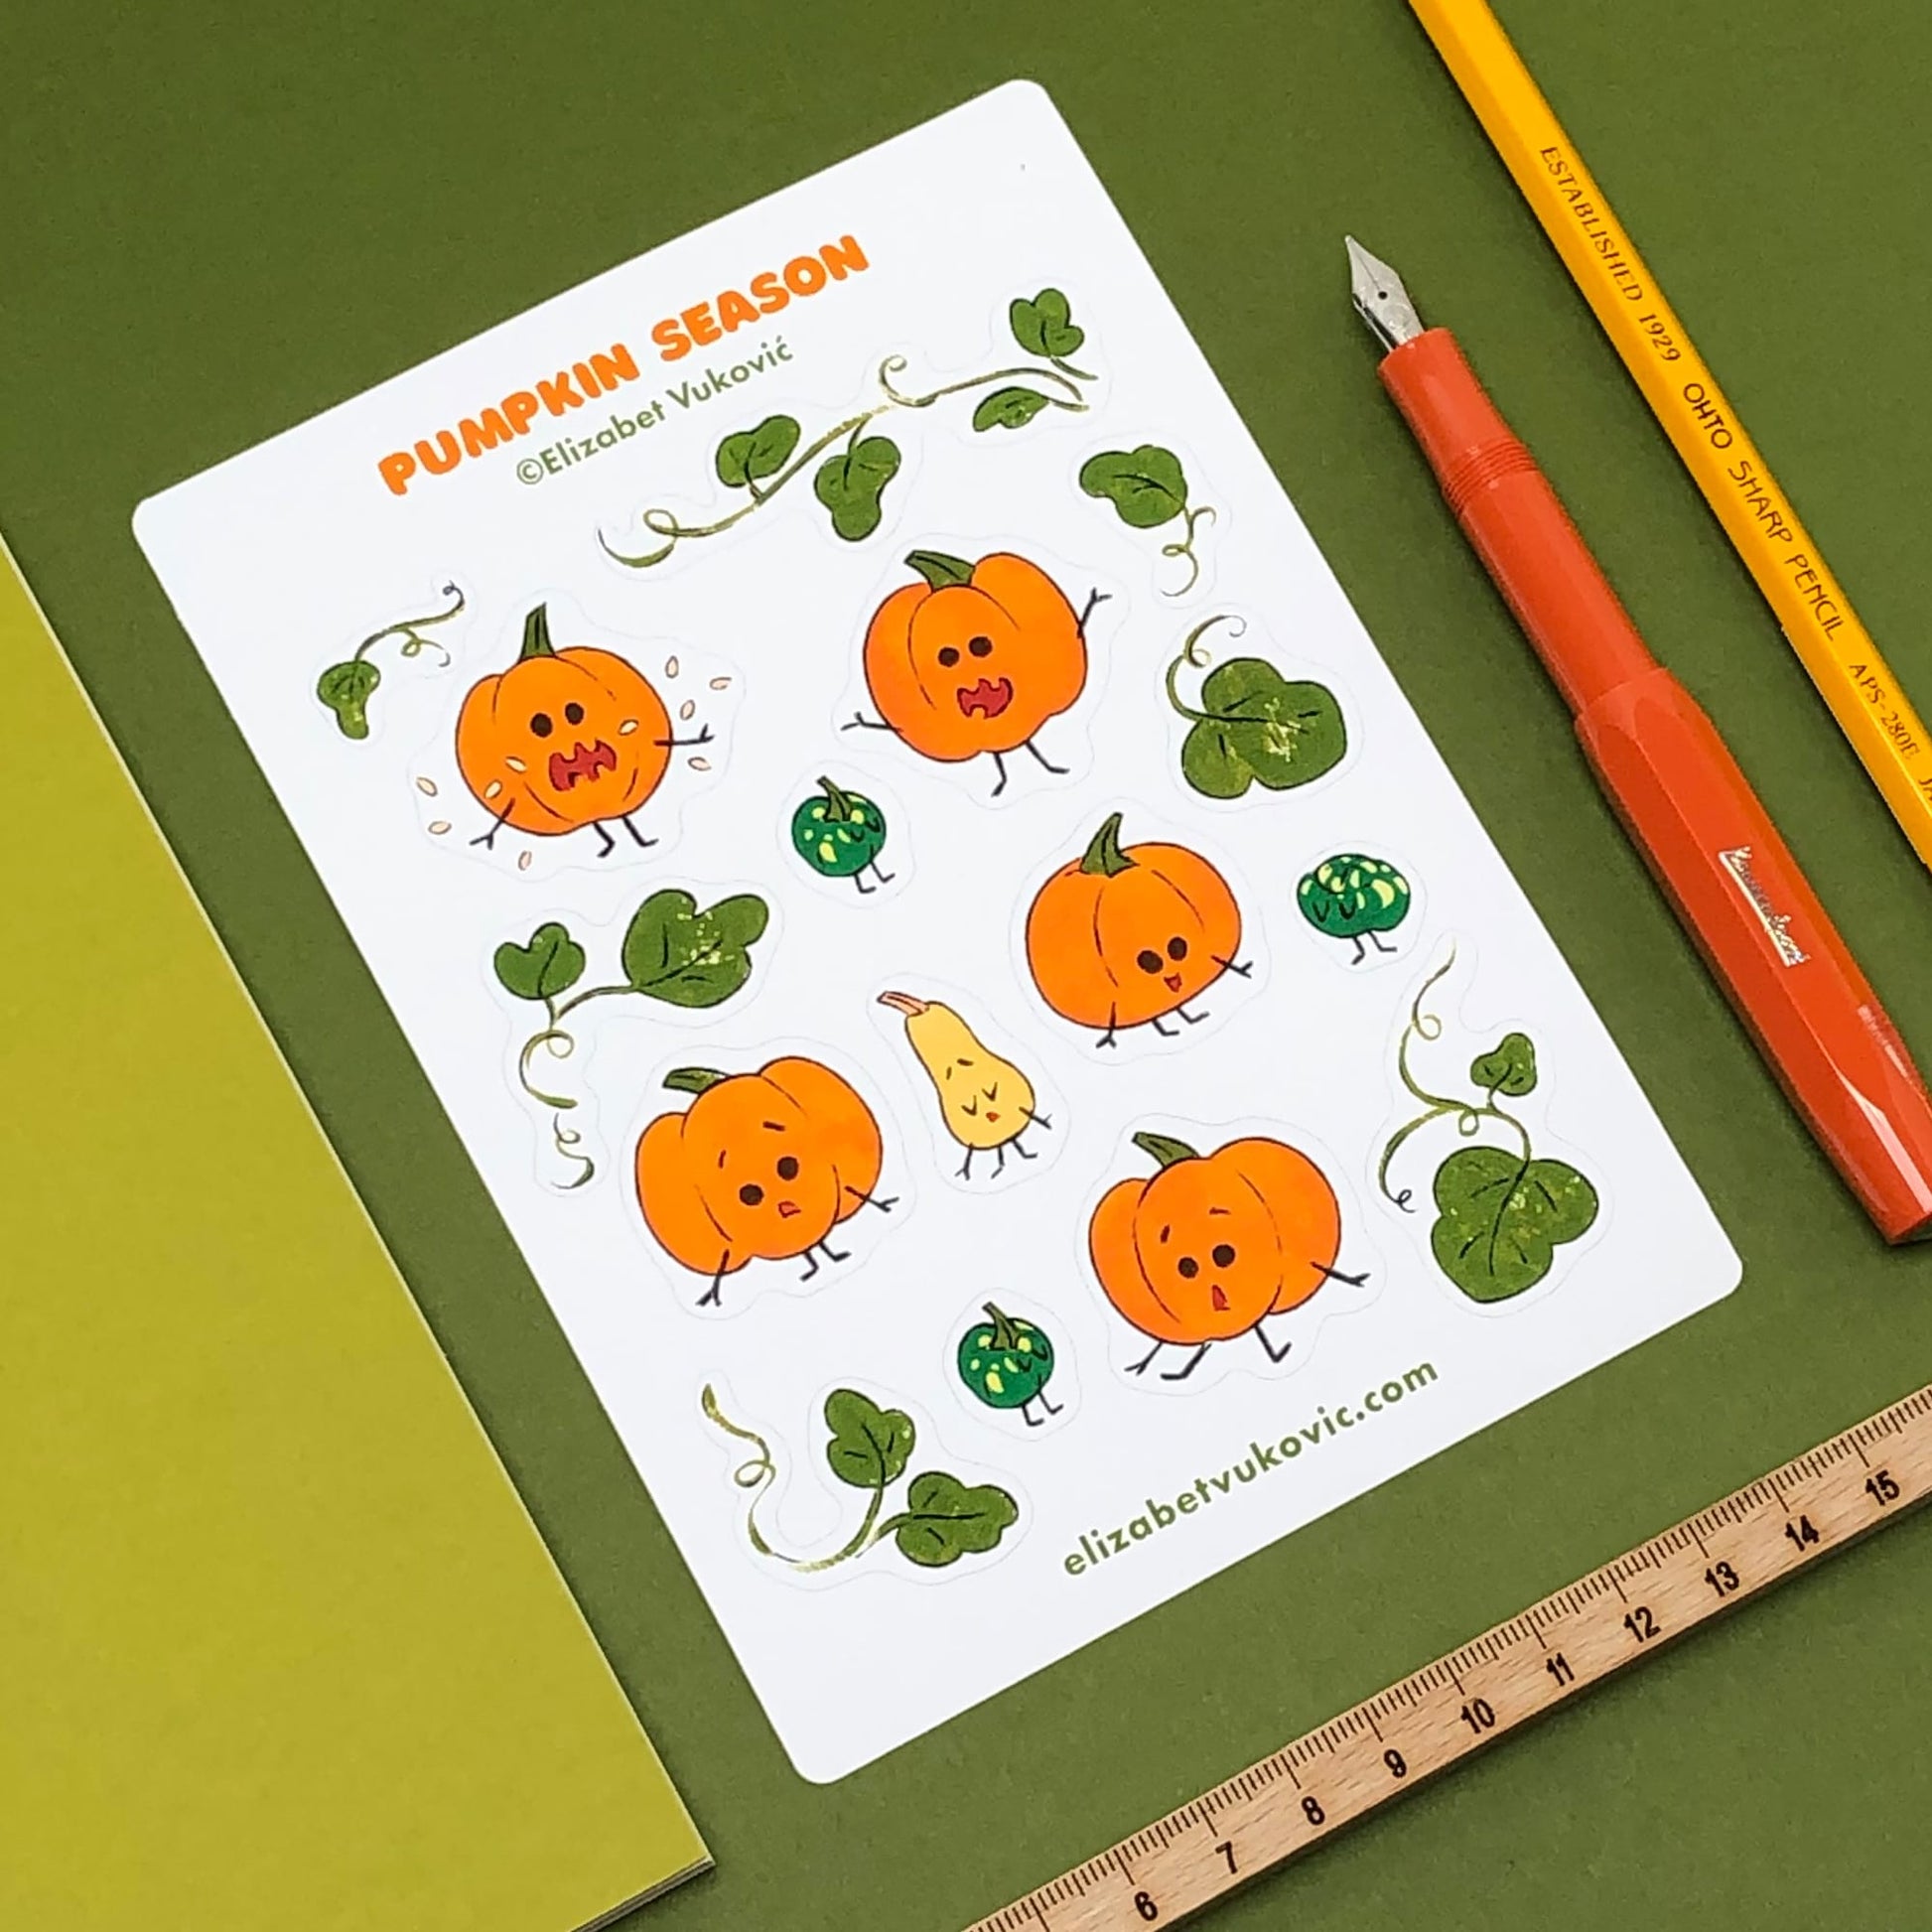 Pumpkins Season stickers with illustrated pumpkins beside pens and journal.